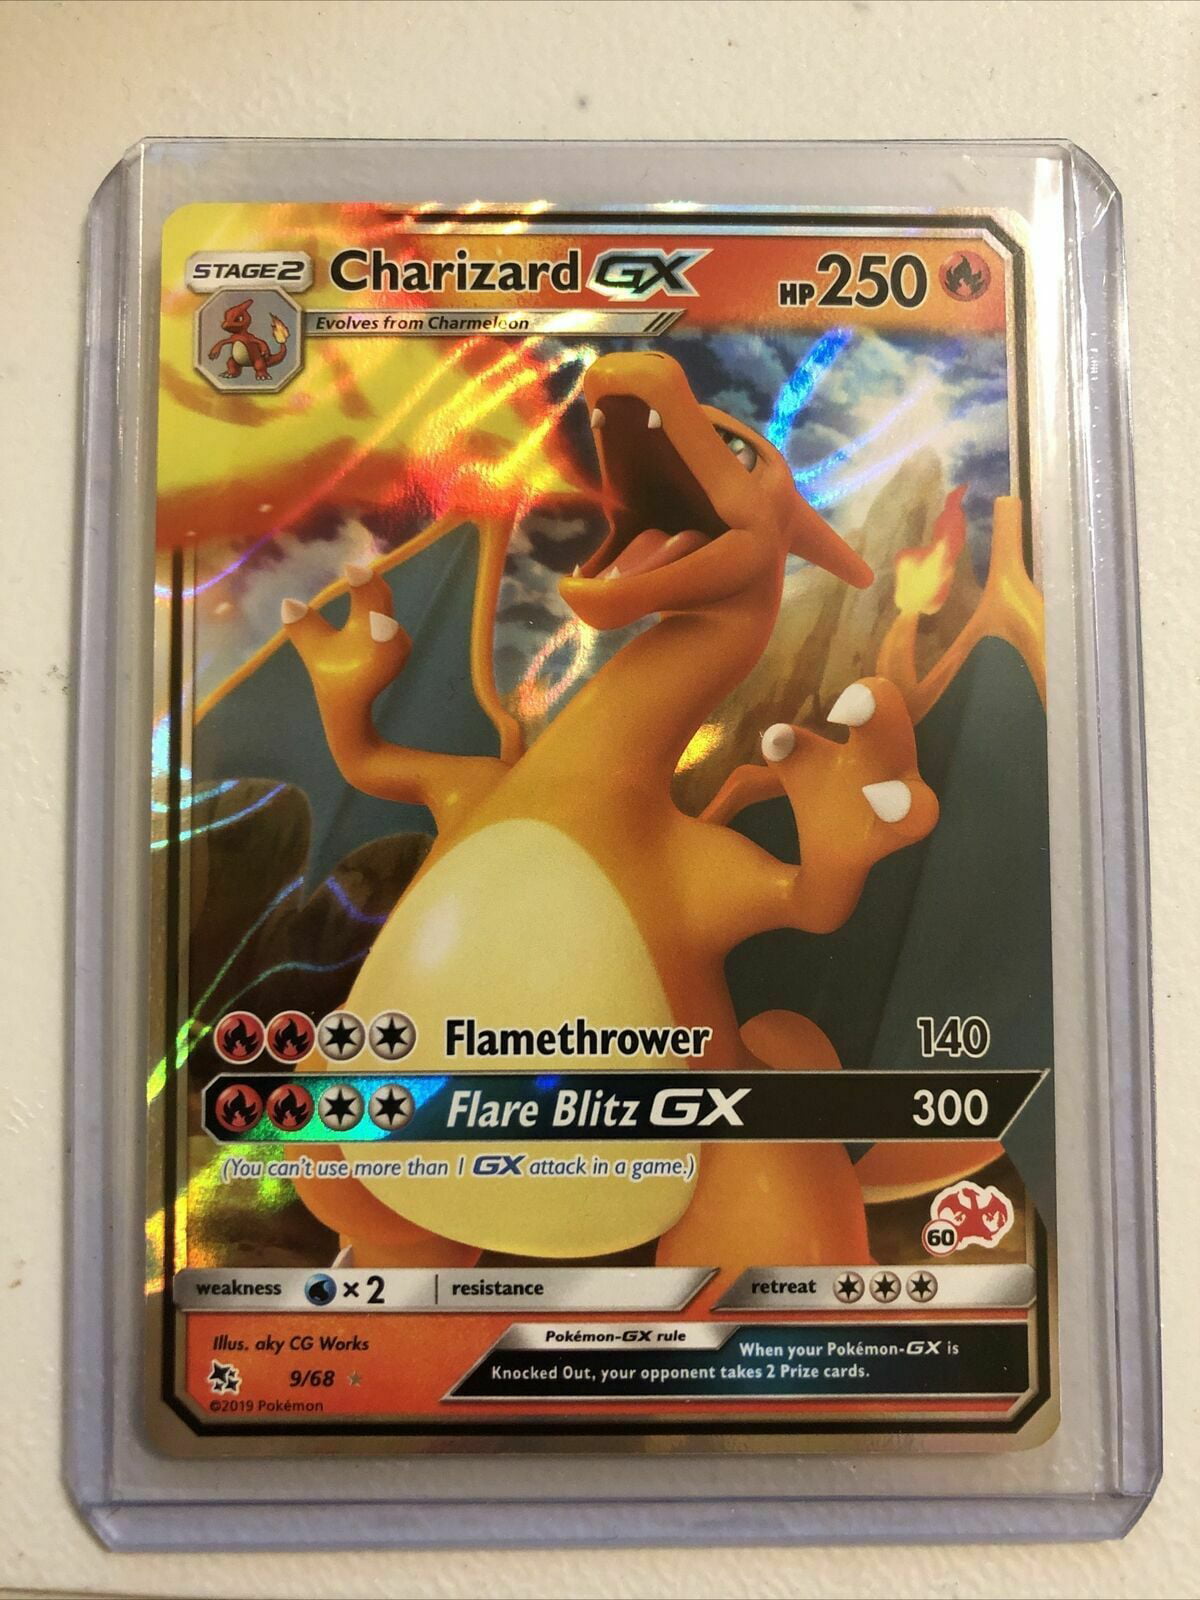 Stamped NM/M Battle Academy Details about   Pikachu 19/68 Charizard Stamp